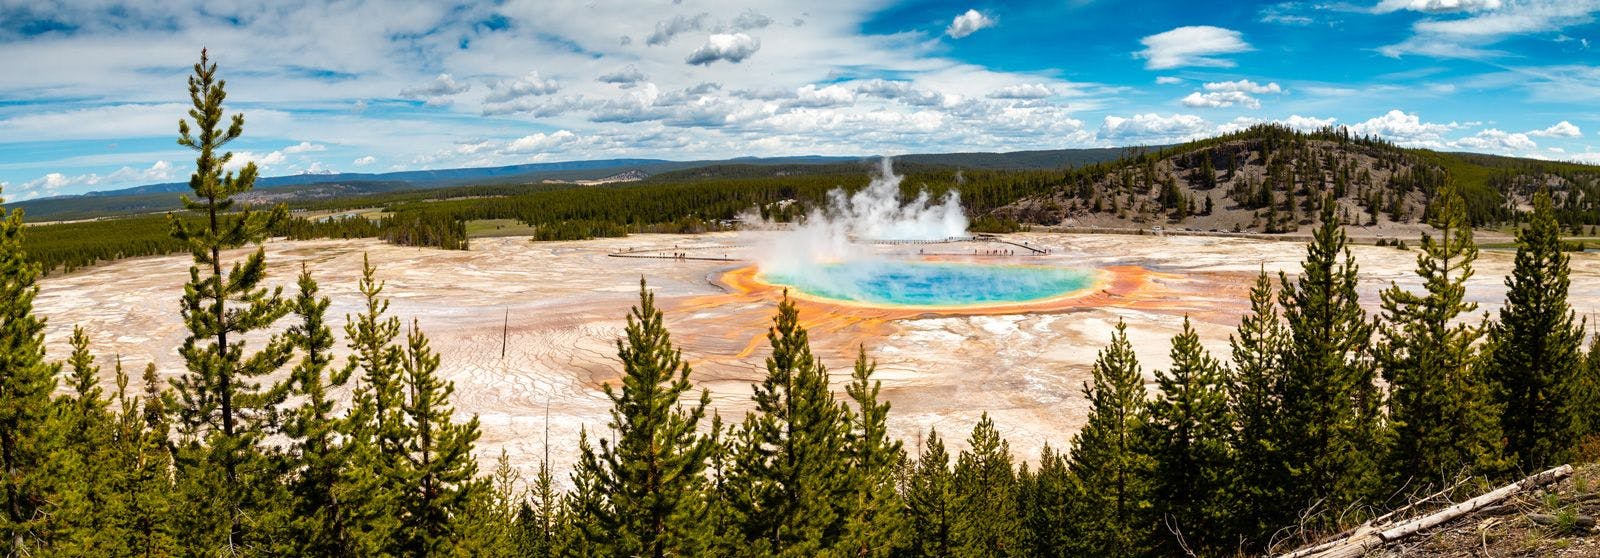 Panoramic view of the Prismatic Pool at Yellowstone National Park 